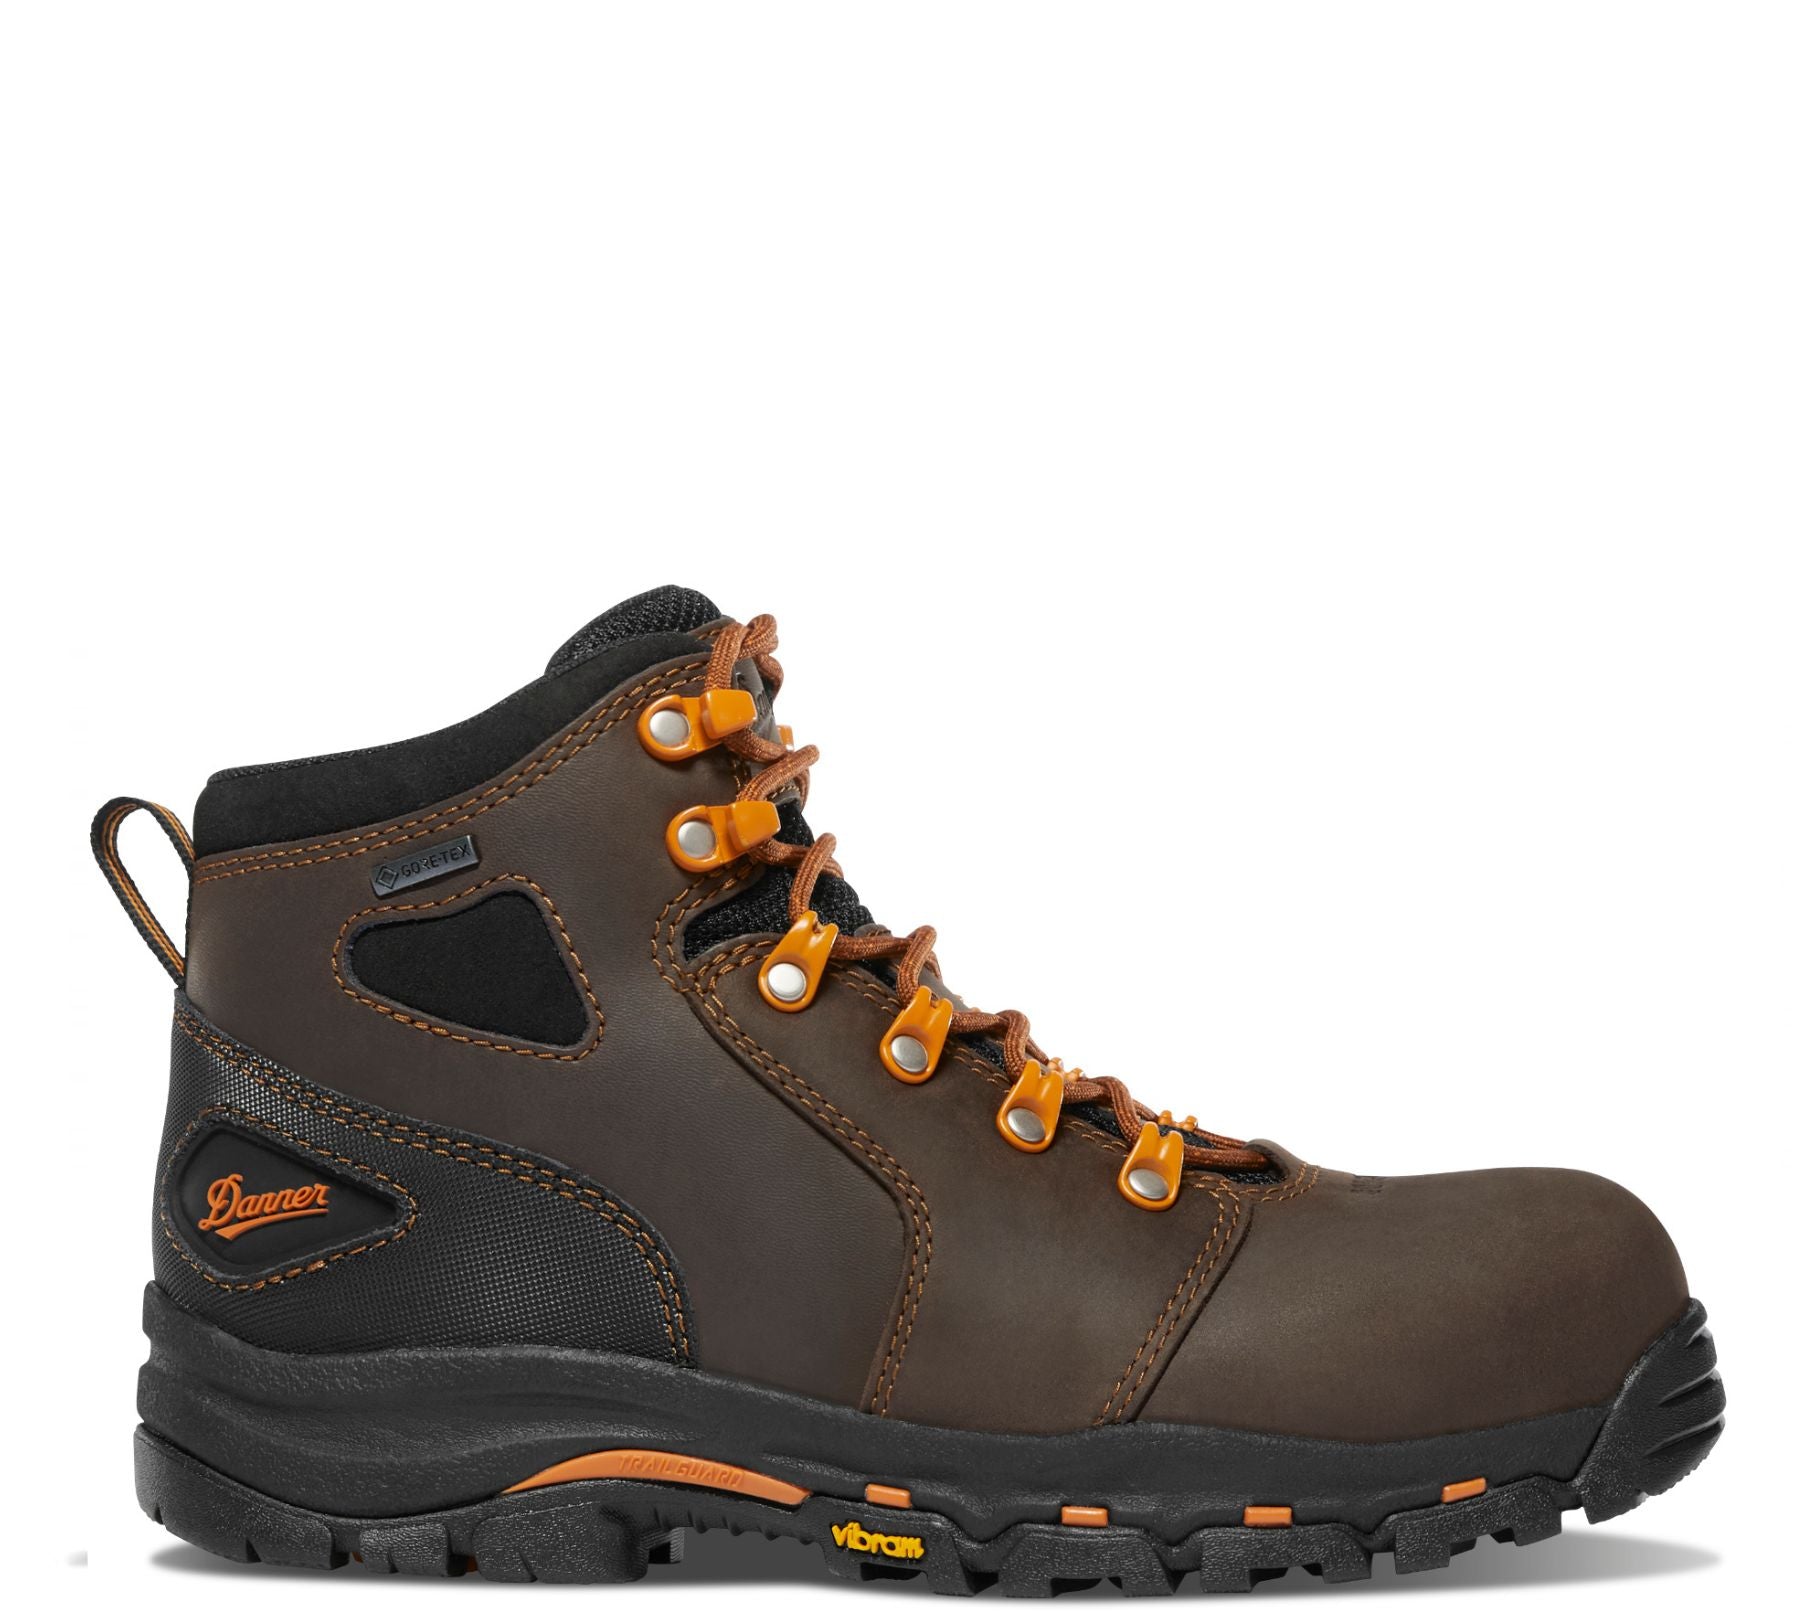 Danner Women's Vicious 4" Waterpoof EH Soft Toe Work Boot - Work World - Workwear, Work Boots, Safety Gear